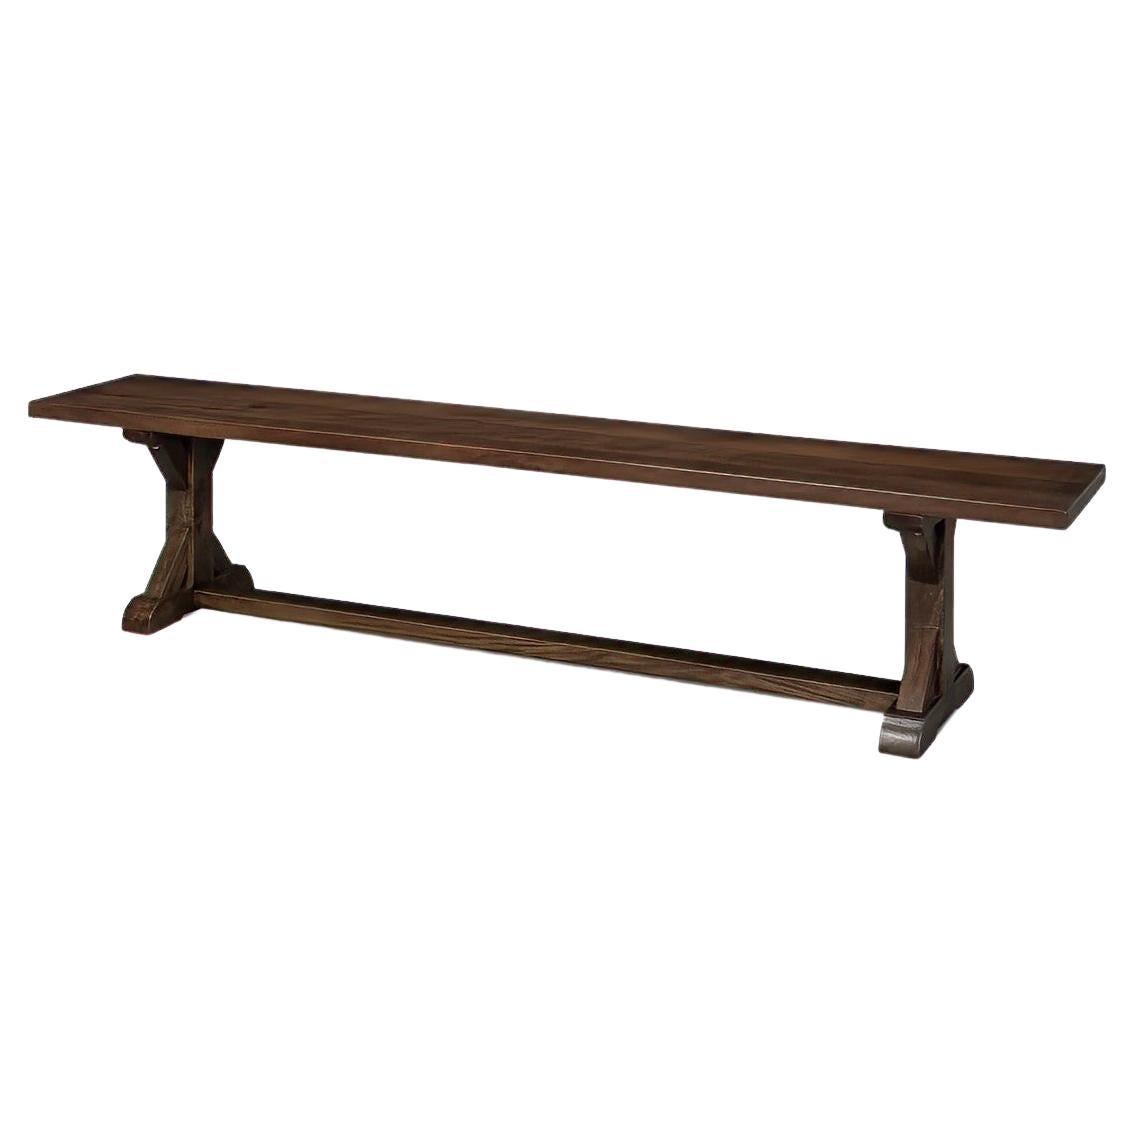 Rustic Farmhouse Bench For Sale